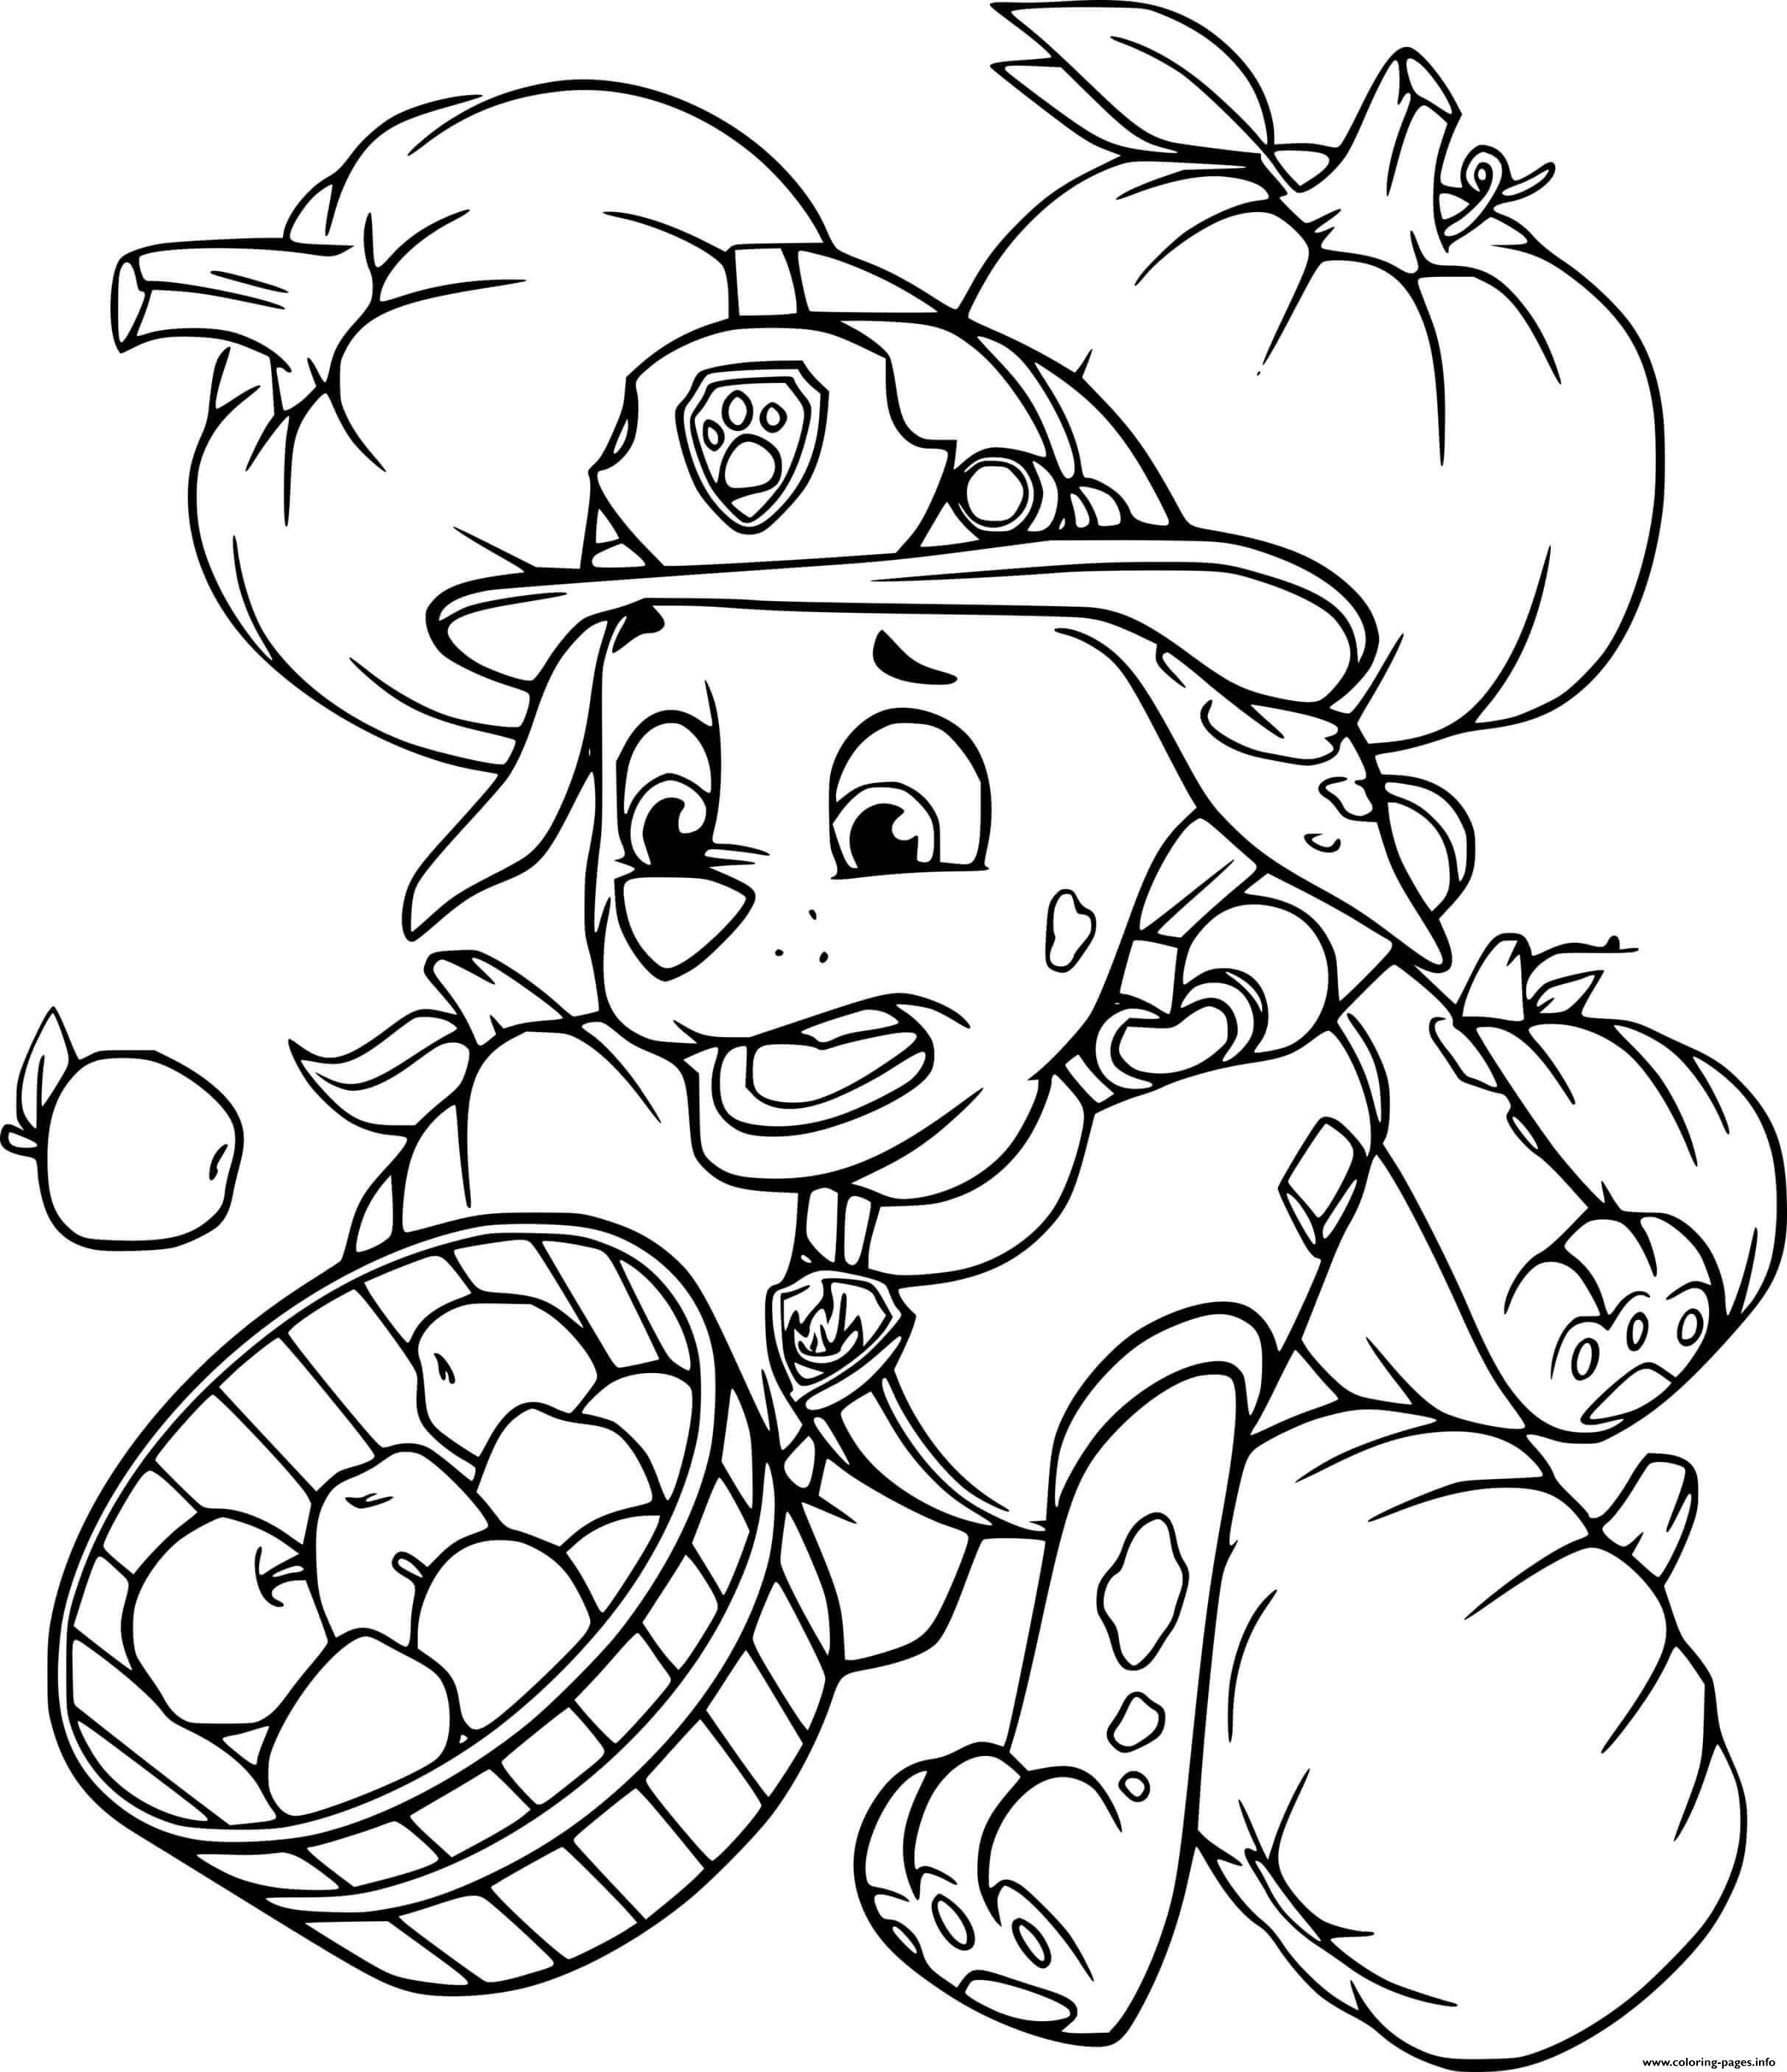 Marshall Harvests Pumpkins And Apples coloring